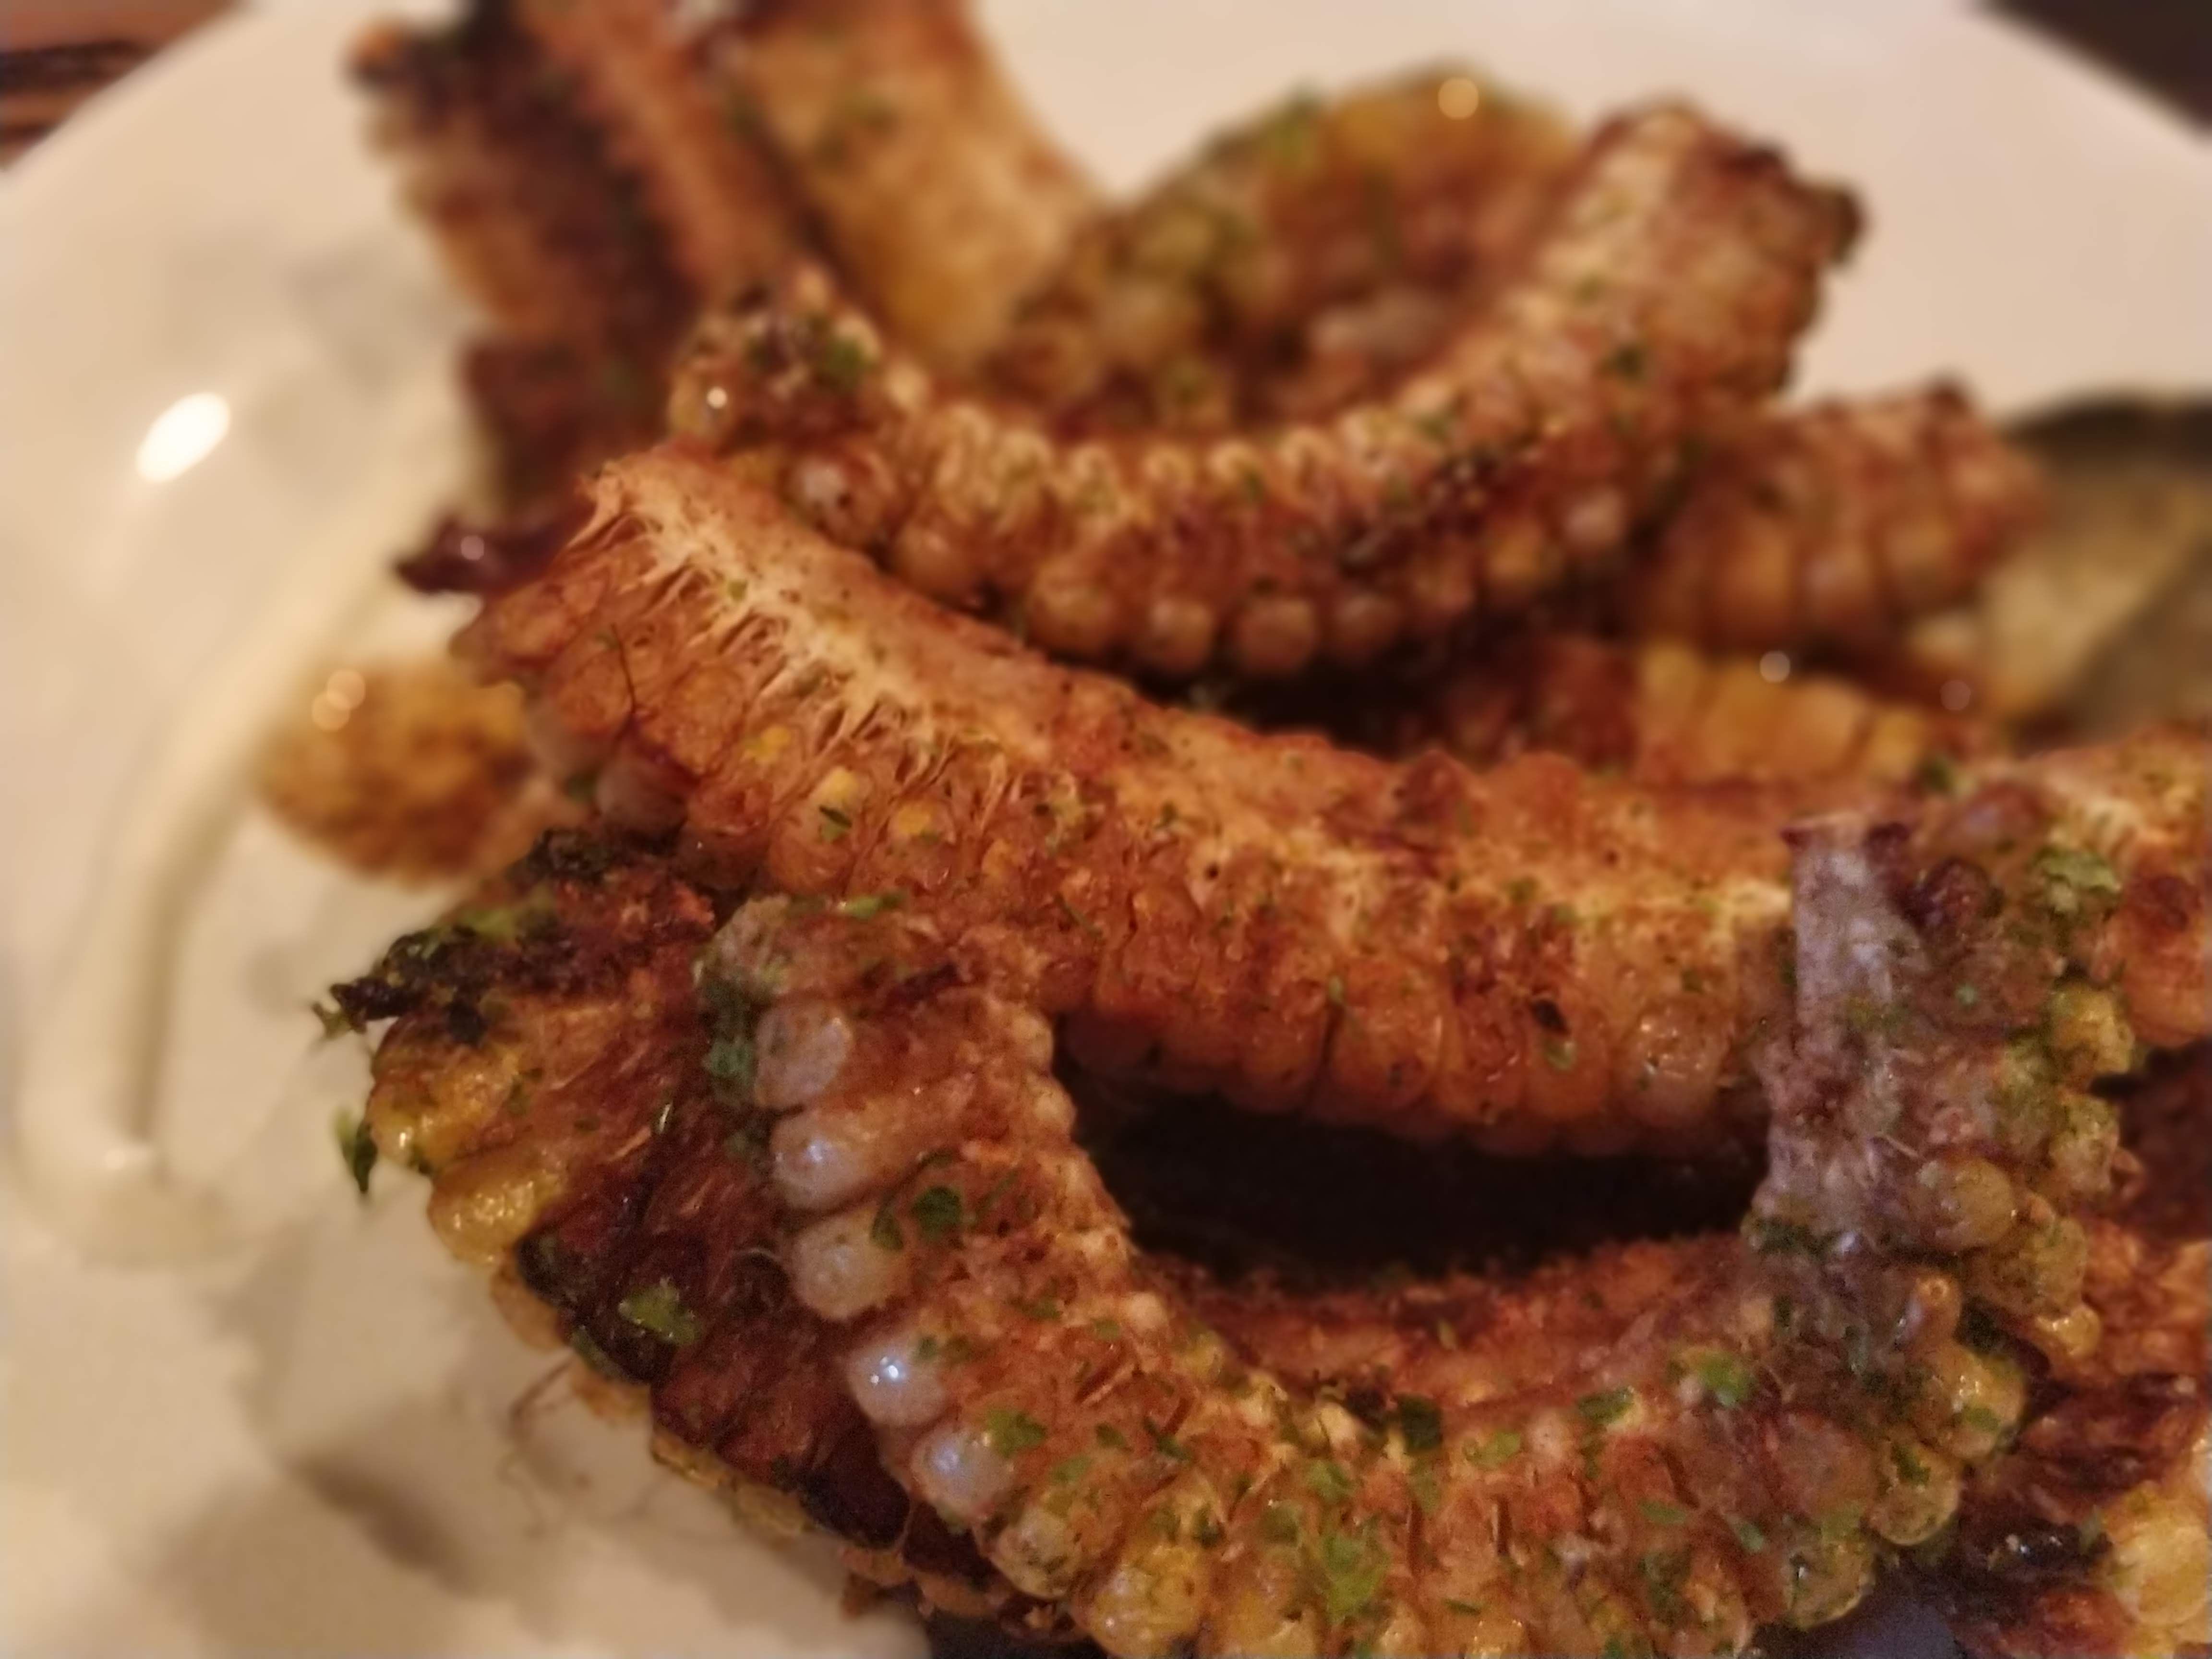 Fried curly corn